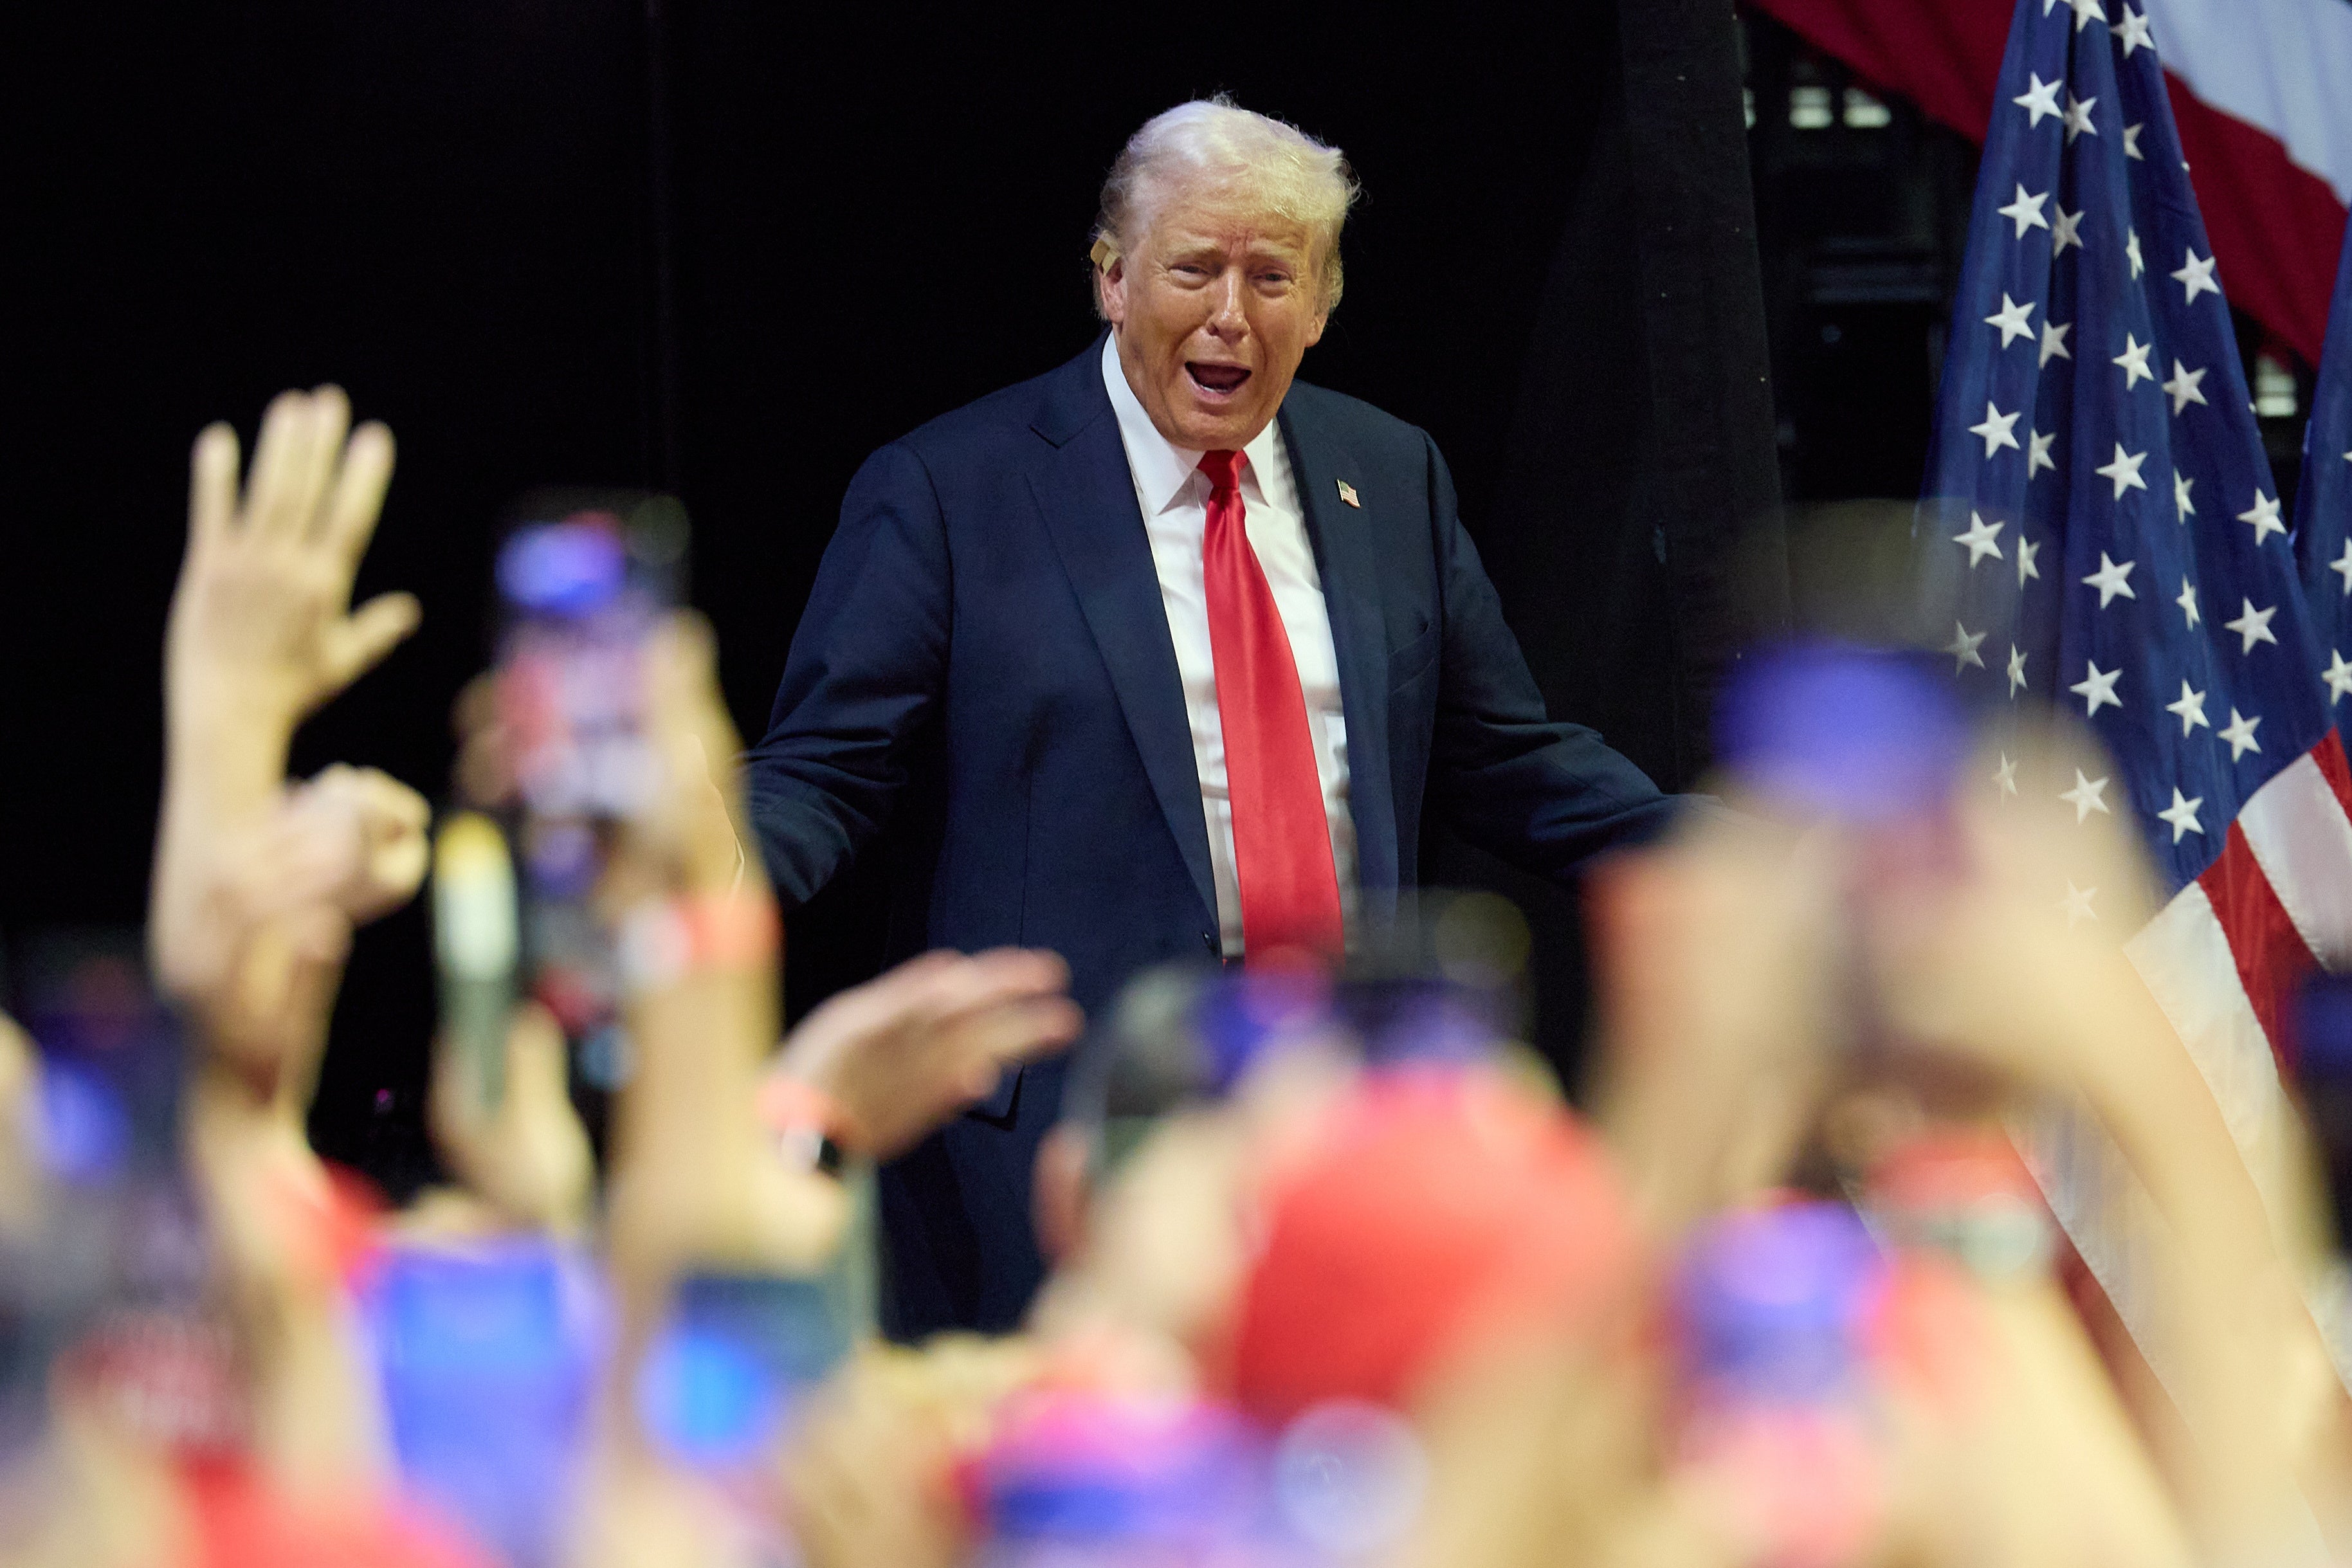 Donald Trump holds a rally in Michigan on July 20. There is great anger within his campaign team that Joe Biden has dropped out of the presidential race and that Harris is now in the running as the Democratic candidate for the presidential nomination.